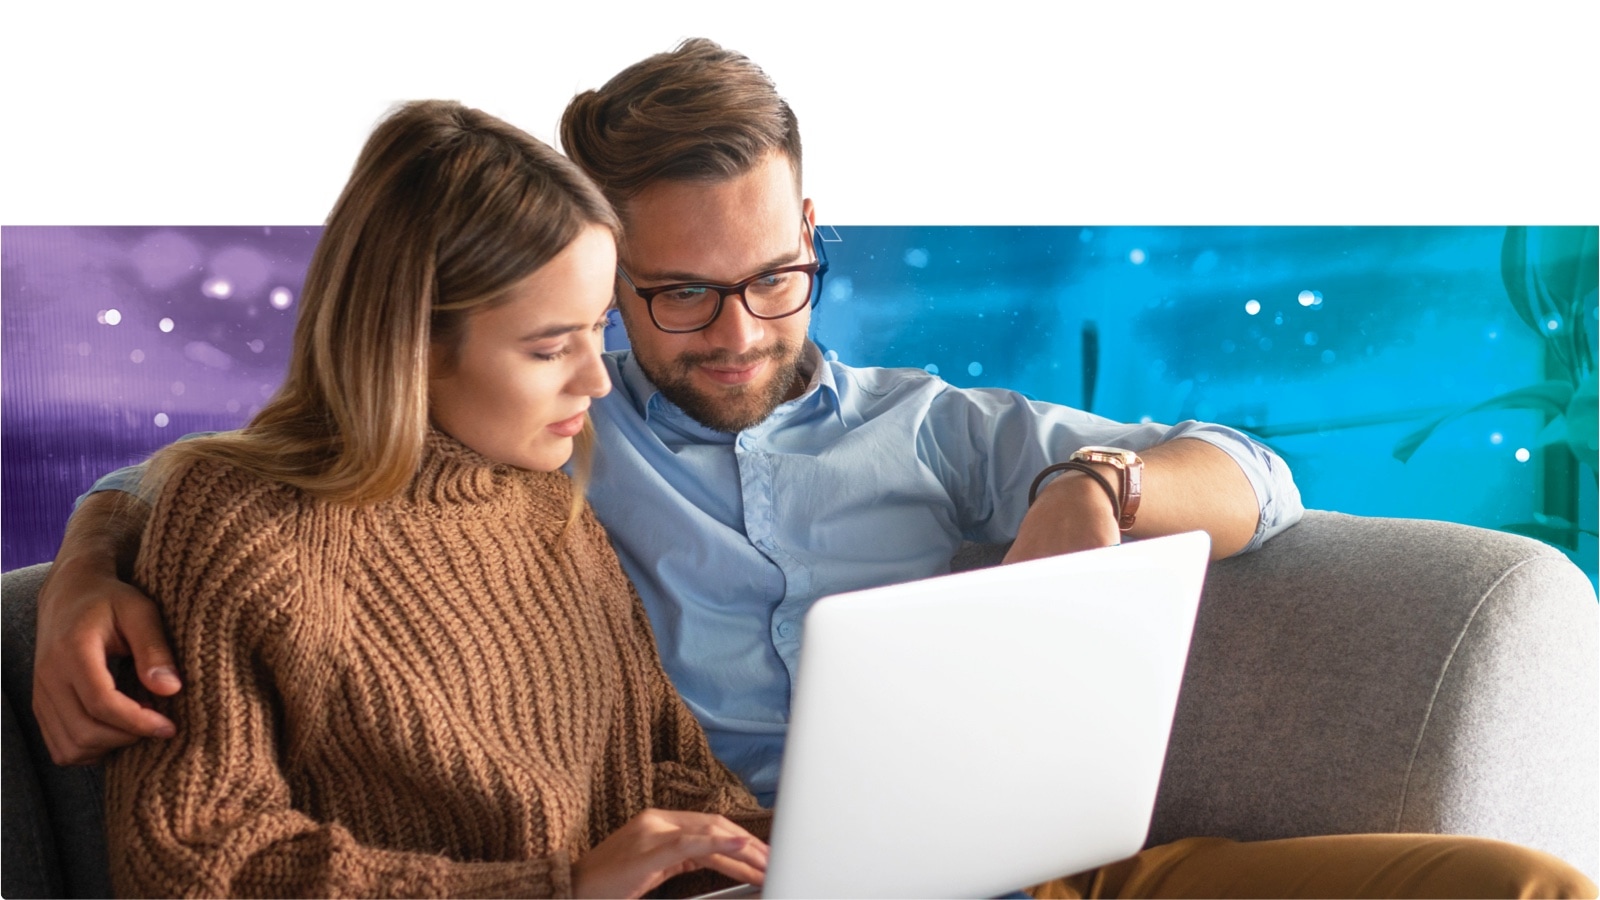 A man and woman sitting on a couch using a laptop together